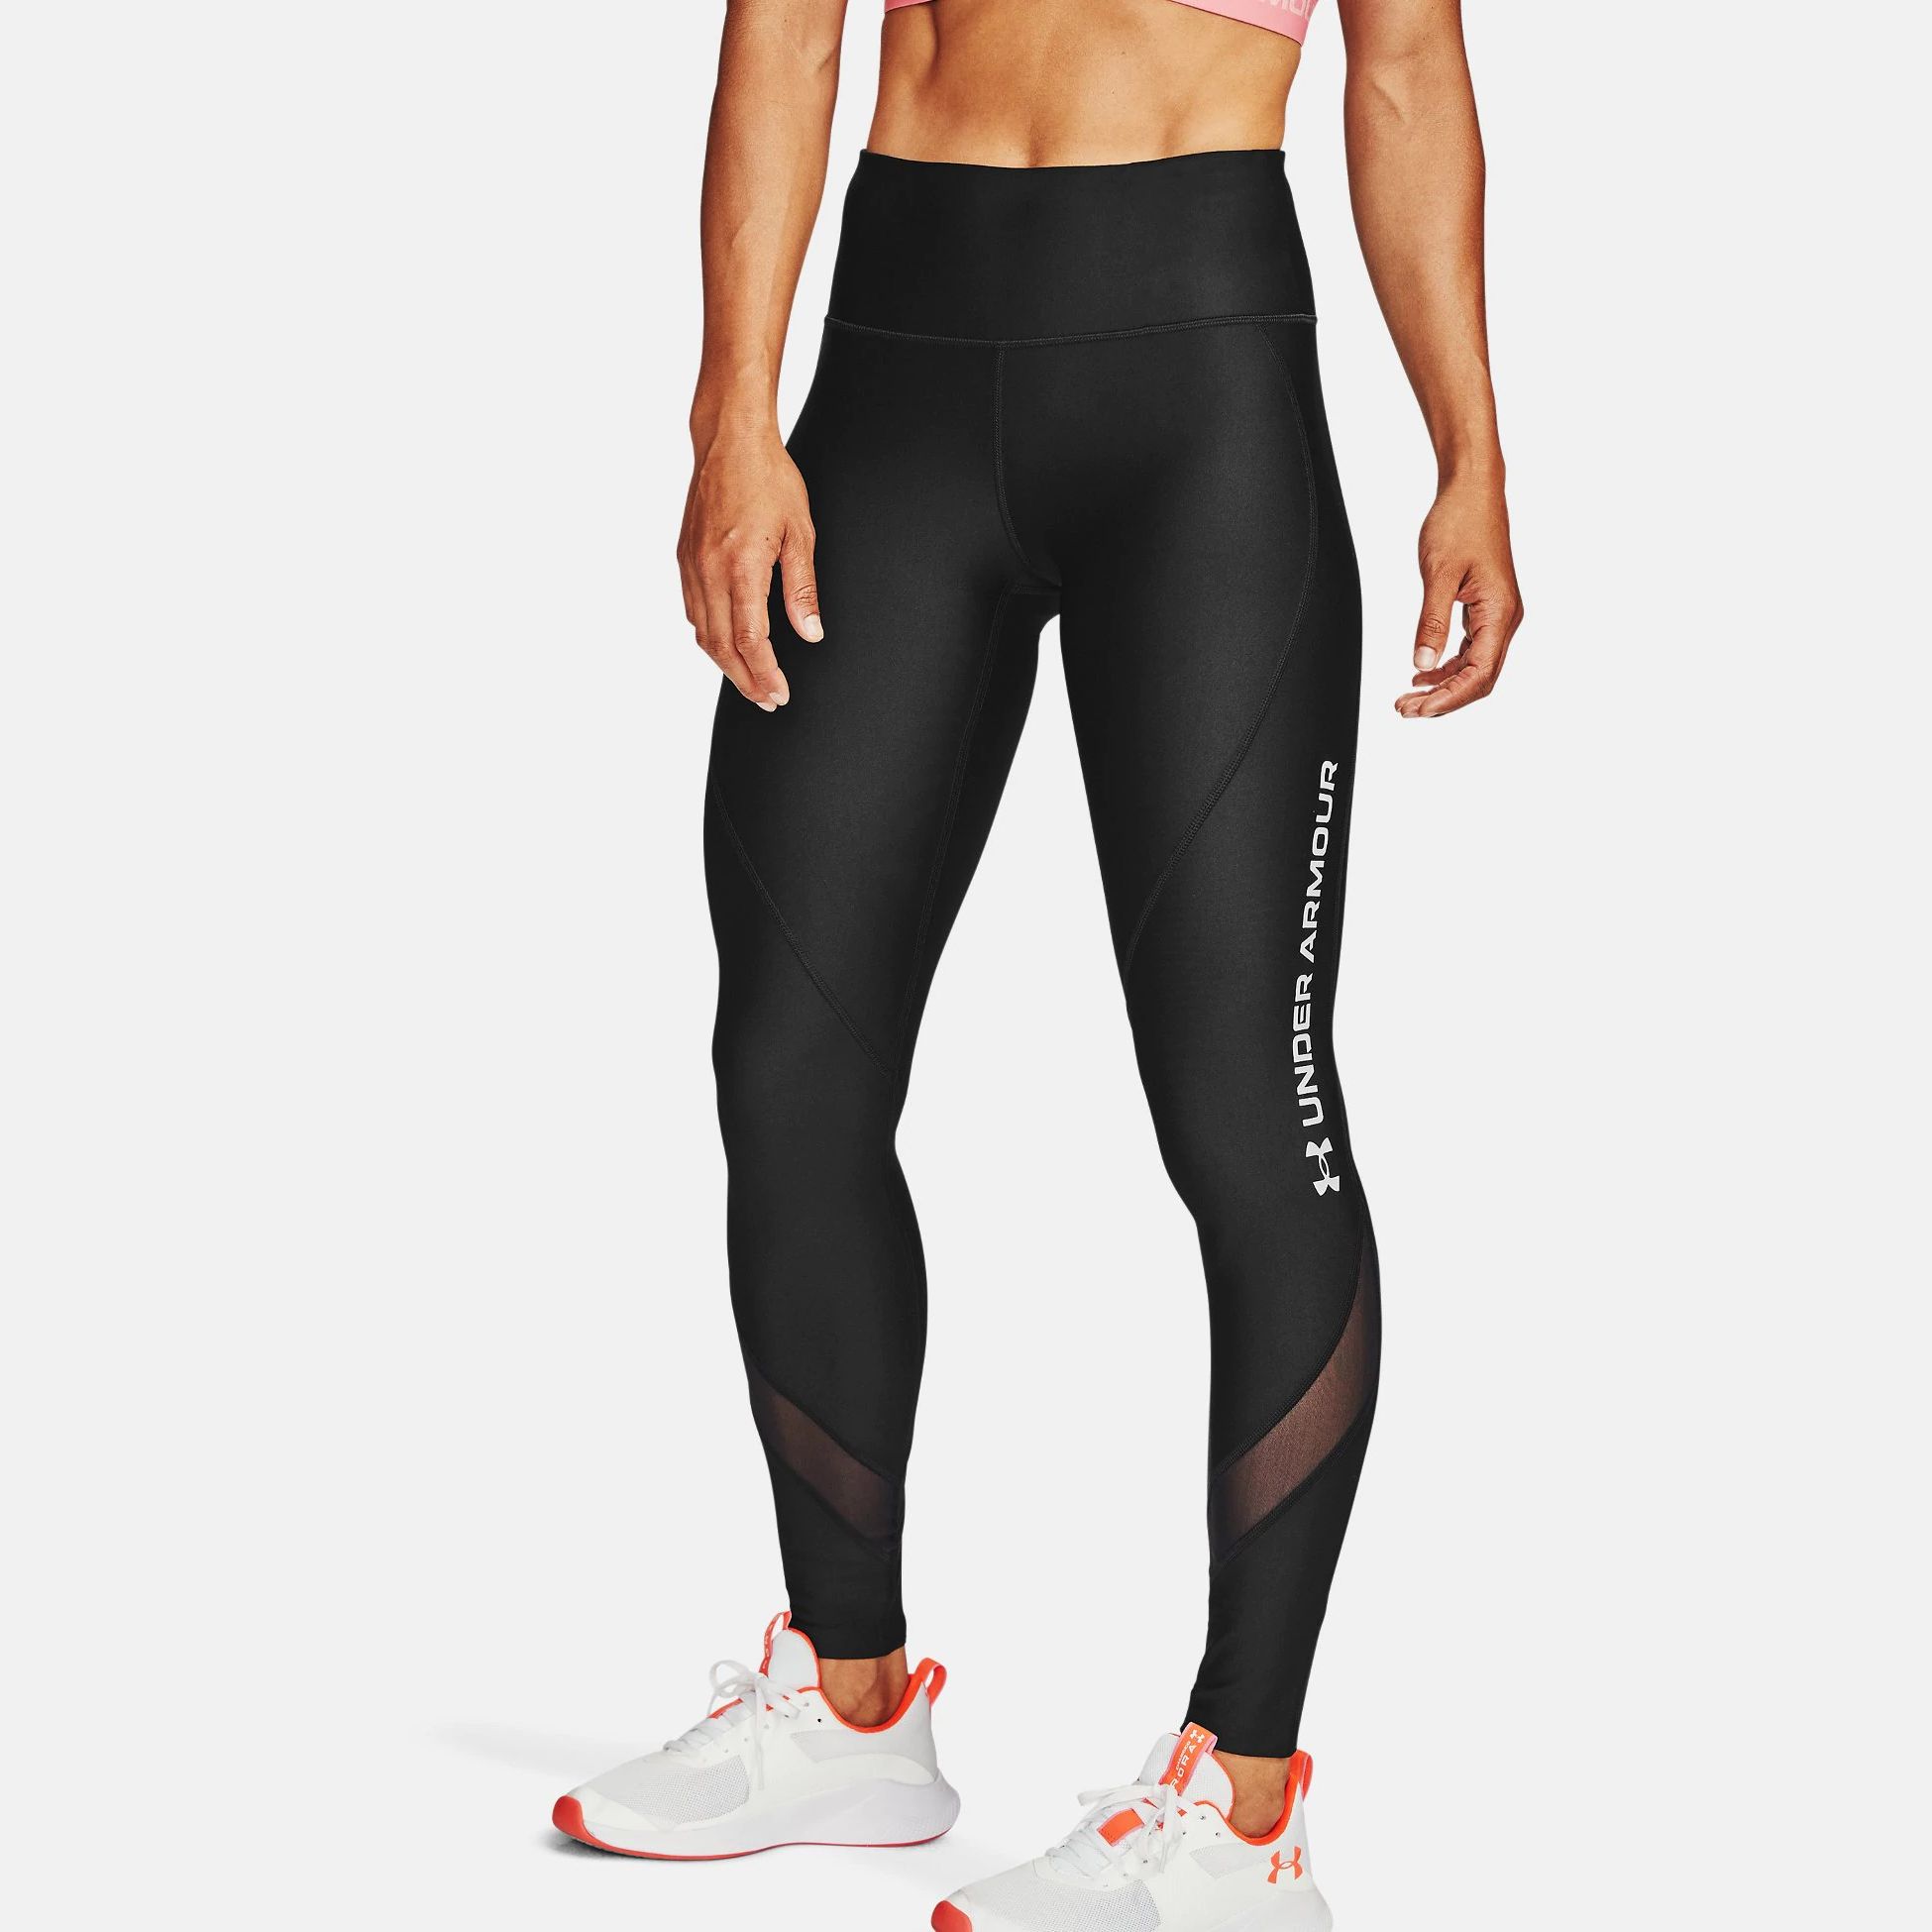 Under Armour HeatGear Cropped Womens Compression Tights Grey Gym Workout Tight 